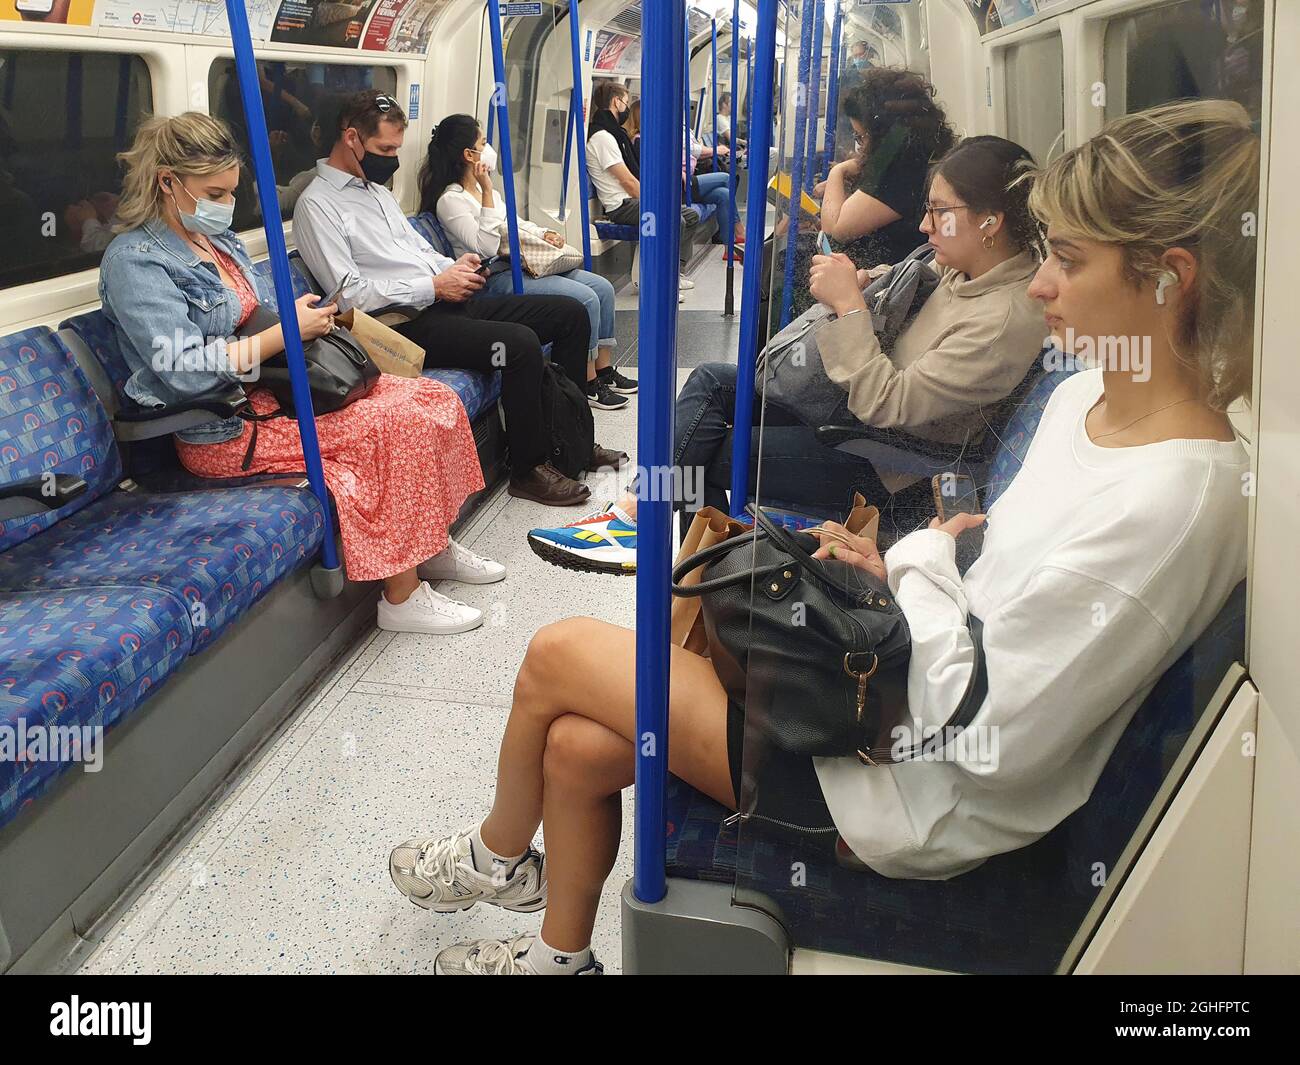 London, UK, 6 September 2021: On the Northern Line of the London Underground in the middle of the day, not all passengers are wearing face masks. Although it is a condition of carriage to wear a face mask according to Transport for London regulations, people do not have to wear them if they have a medical exemption and enforcement for non-compliance seems low. Anna Watson/Alamy Live News Stock Photo